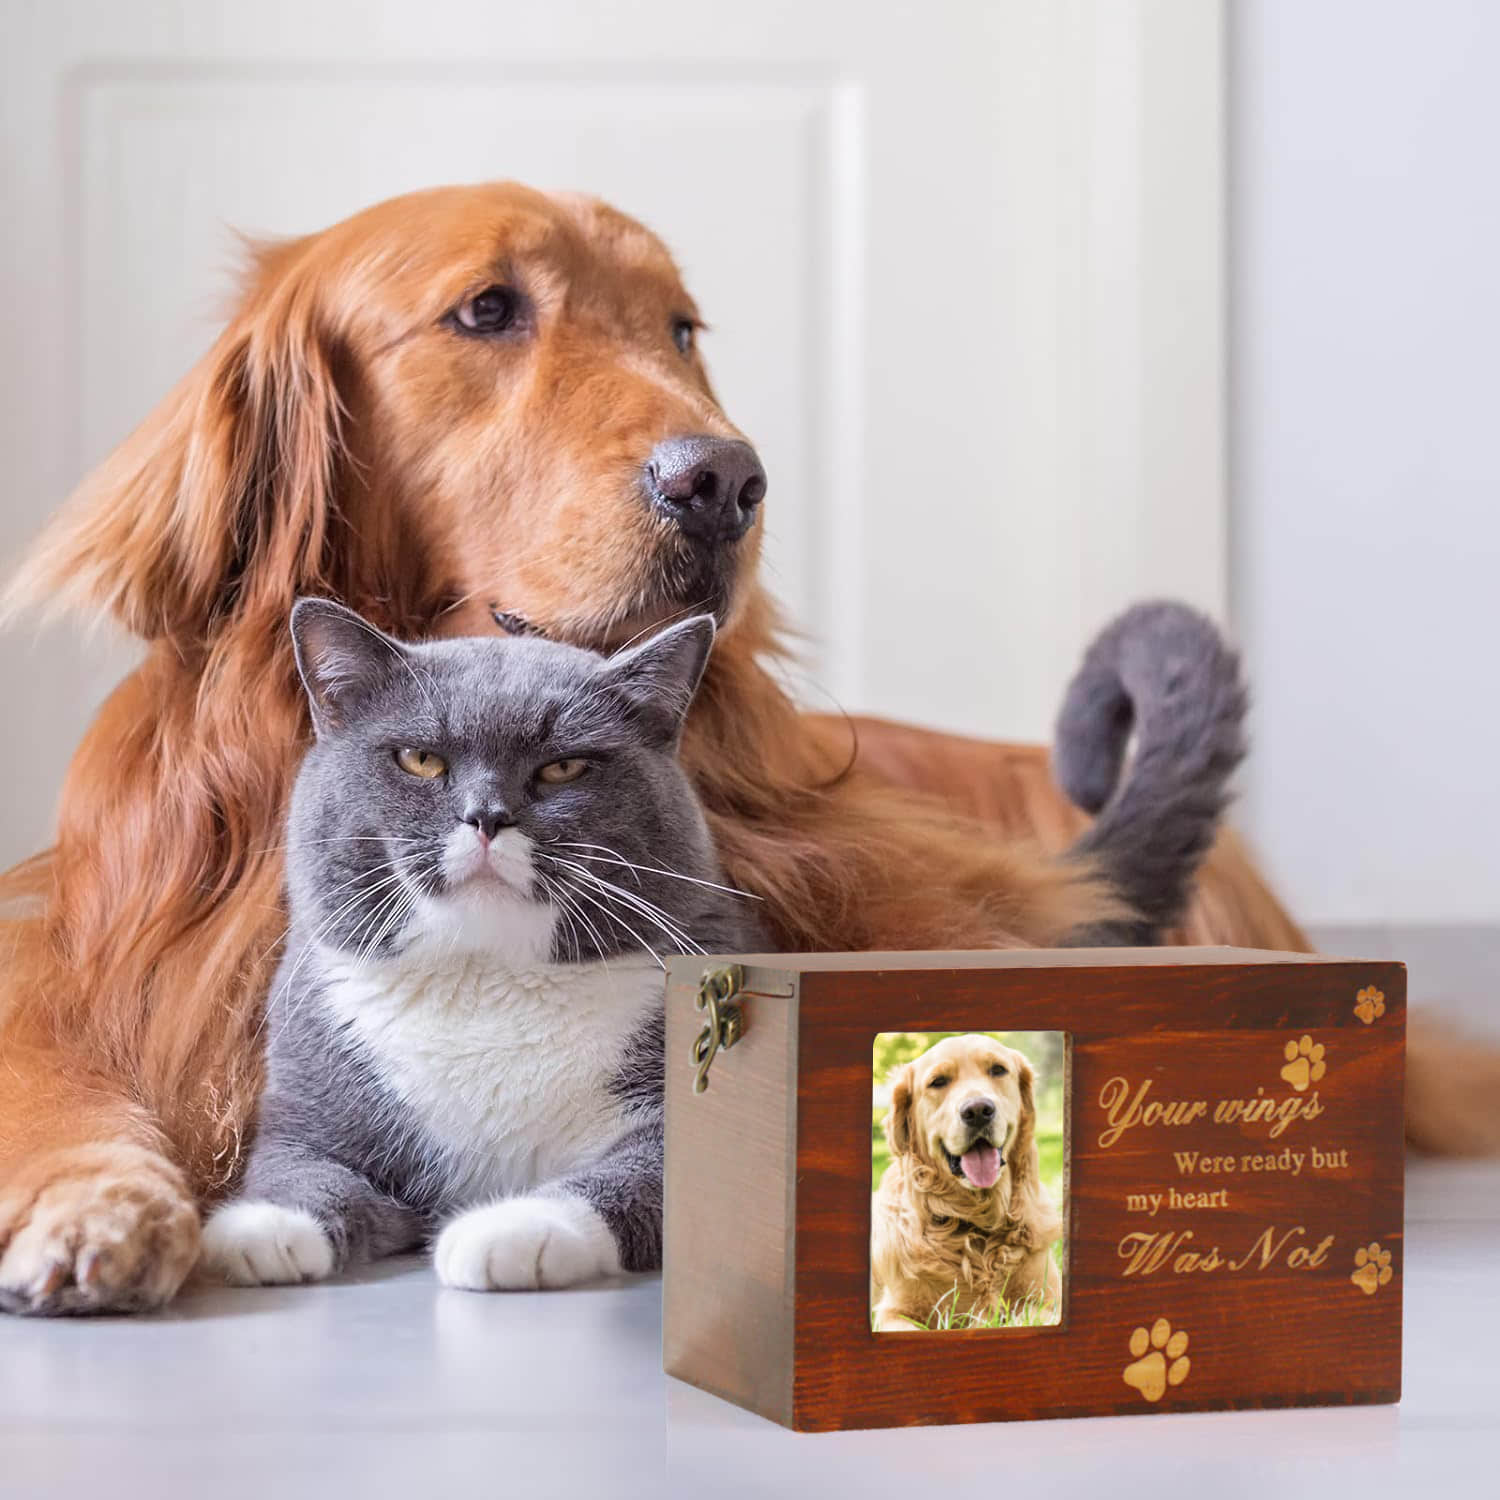 🔥HOT SALE 49% OFF - Wooden Pet Memorial Urns with Photo Frame